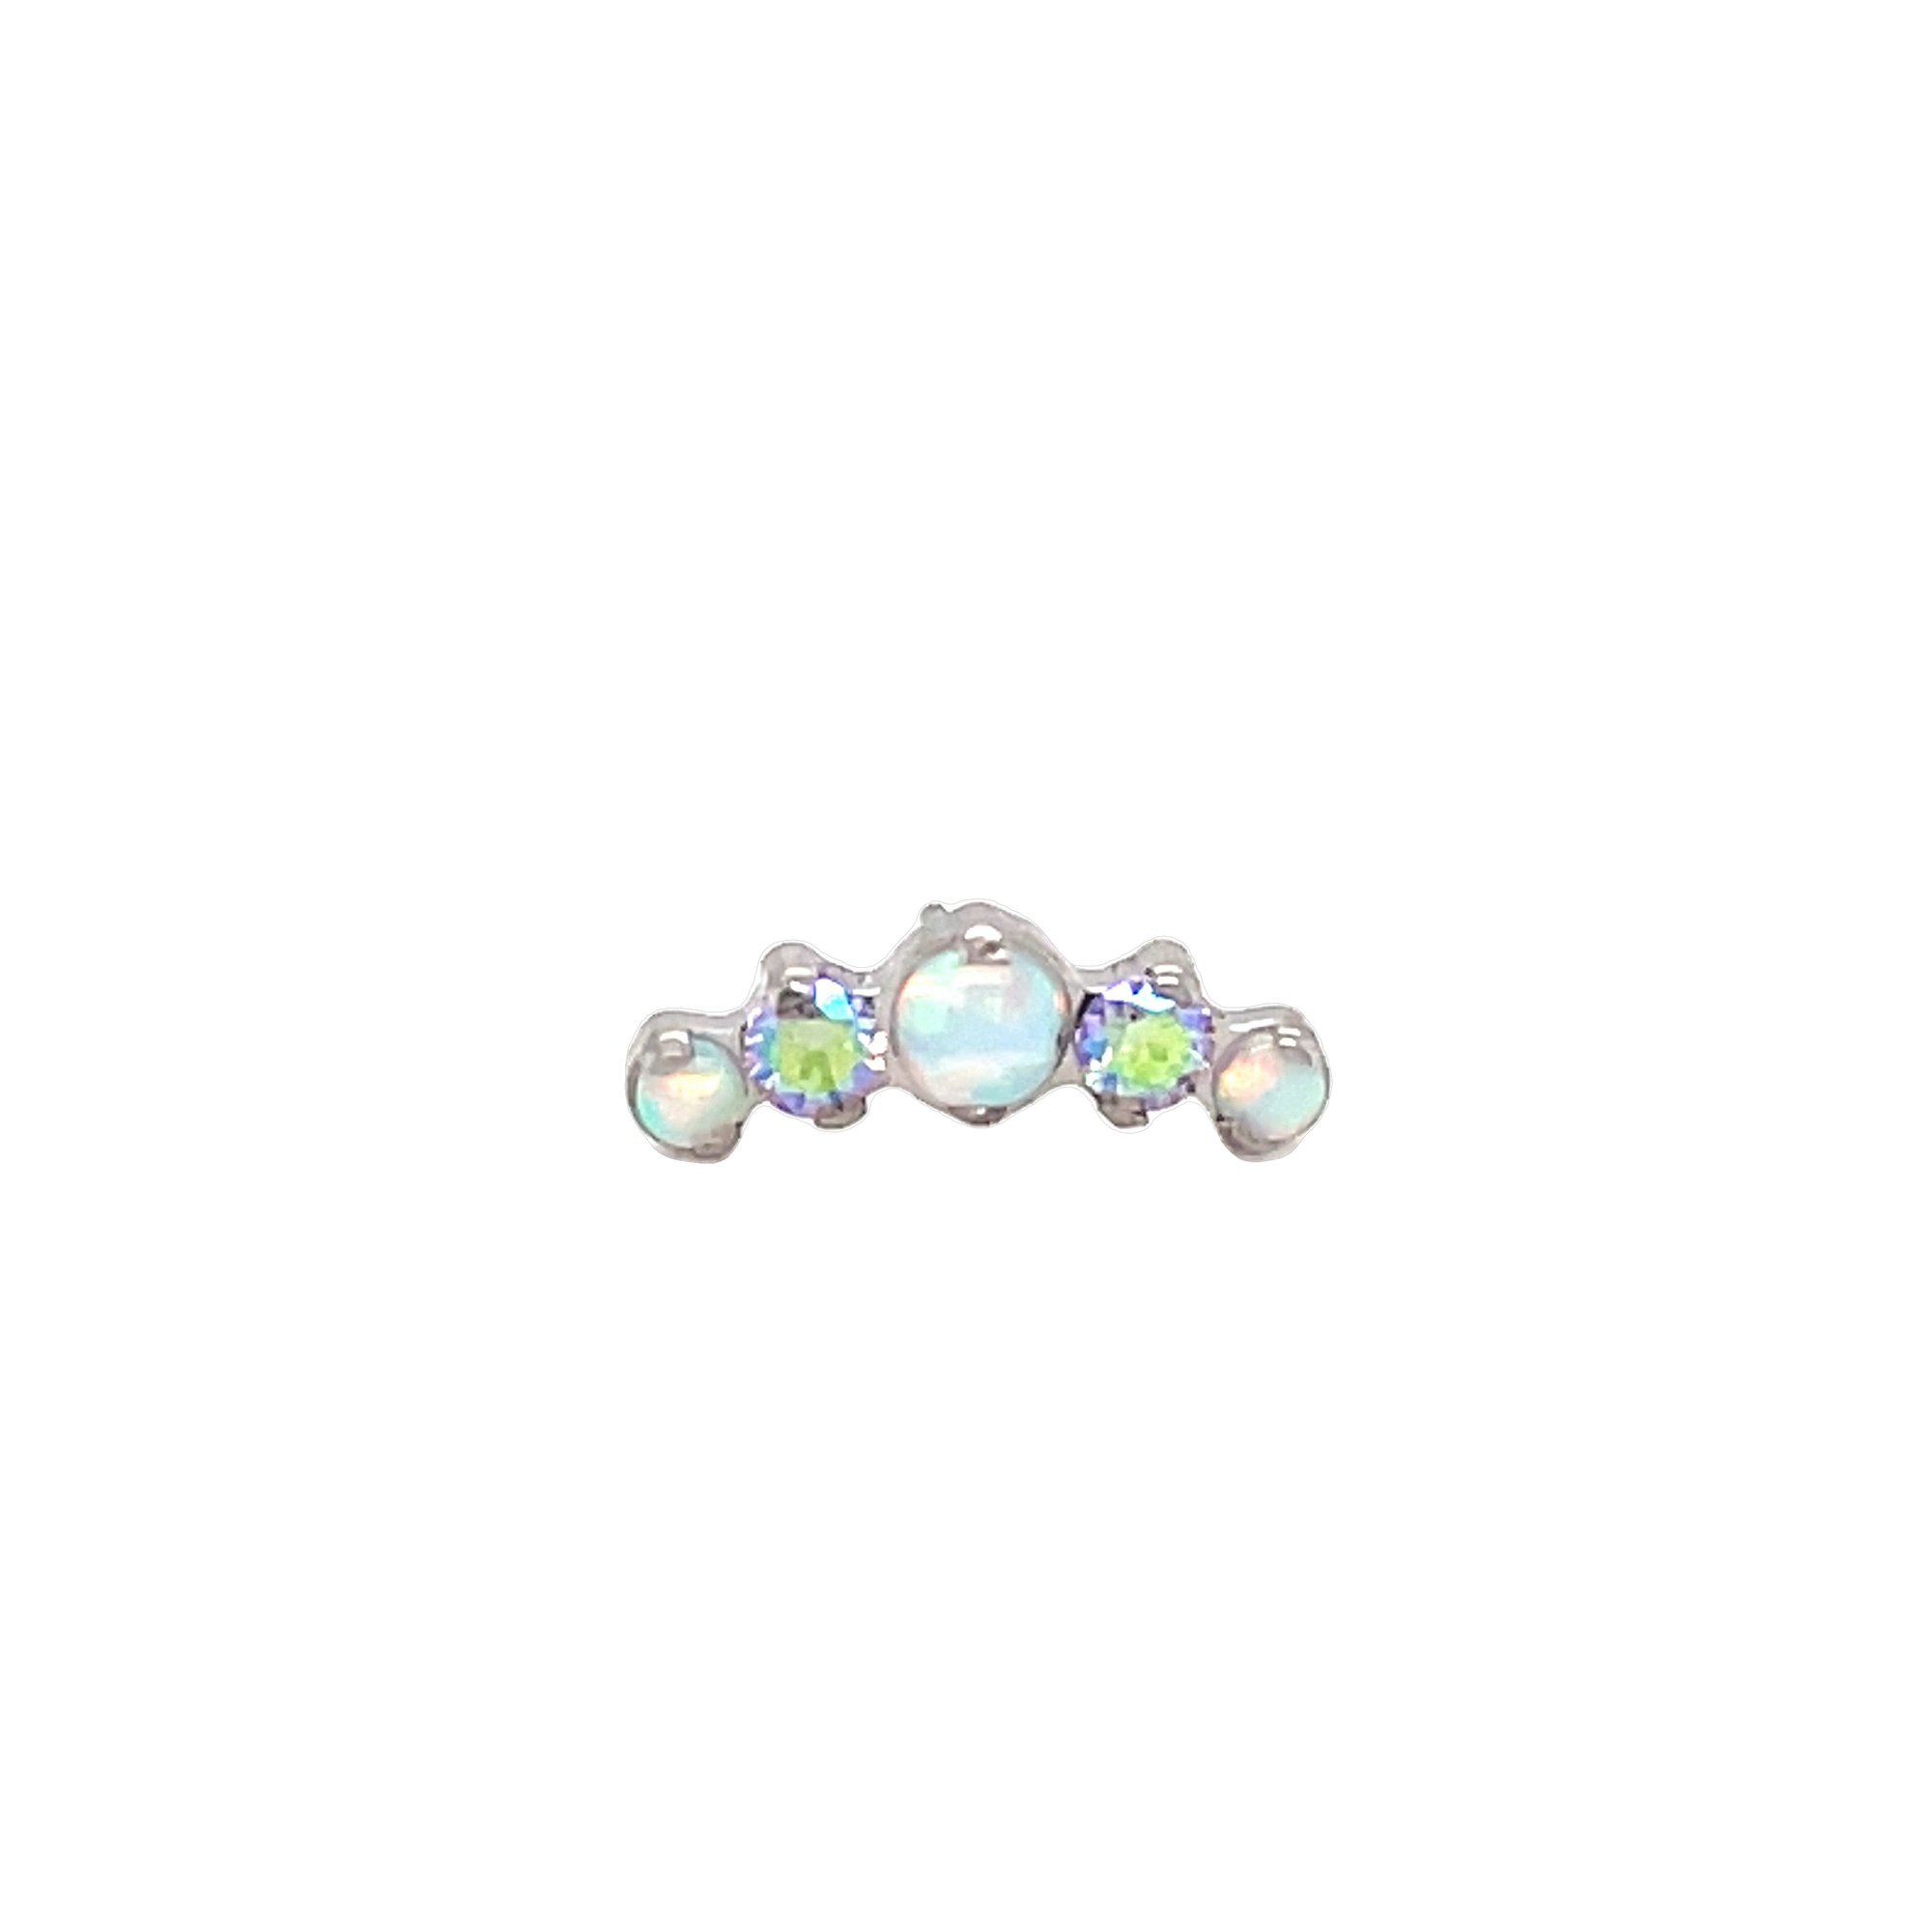 Industrial Strength Odyssey Prium in white opal and shine cz from isha body jewellery